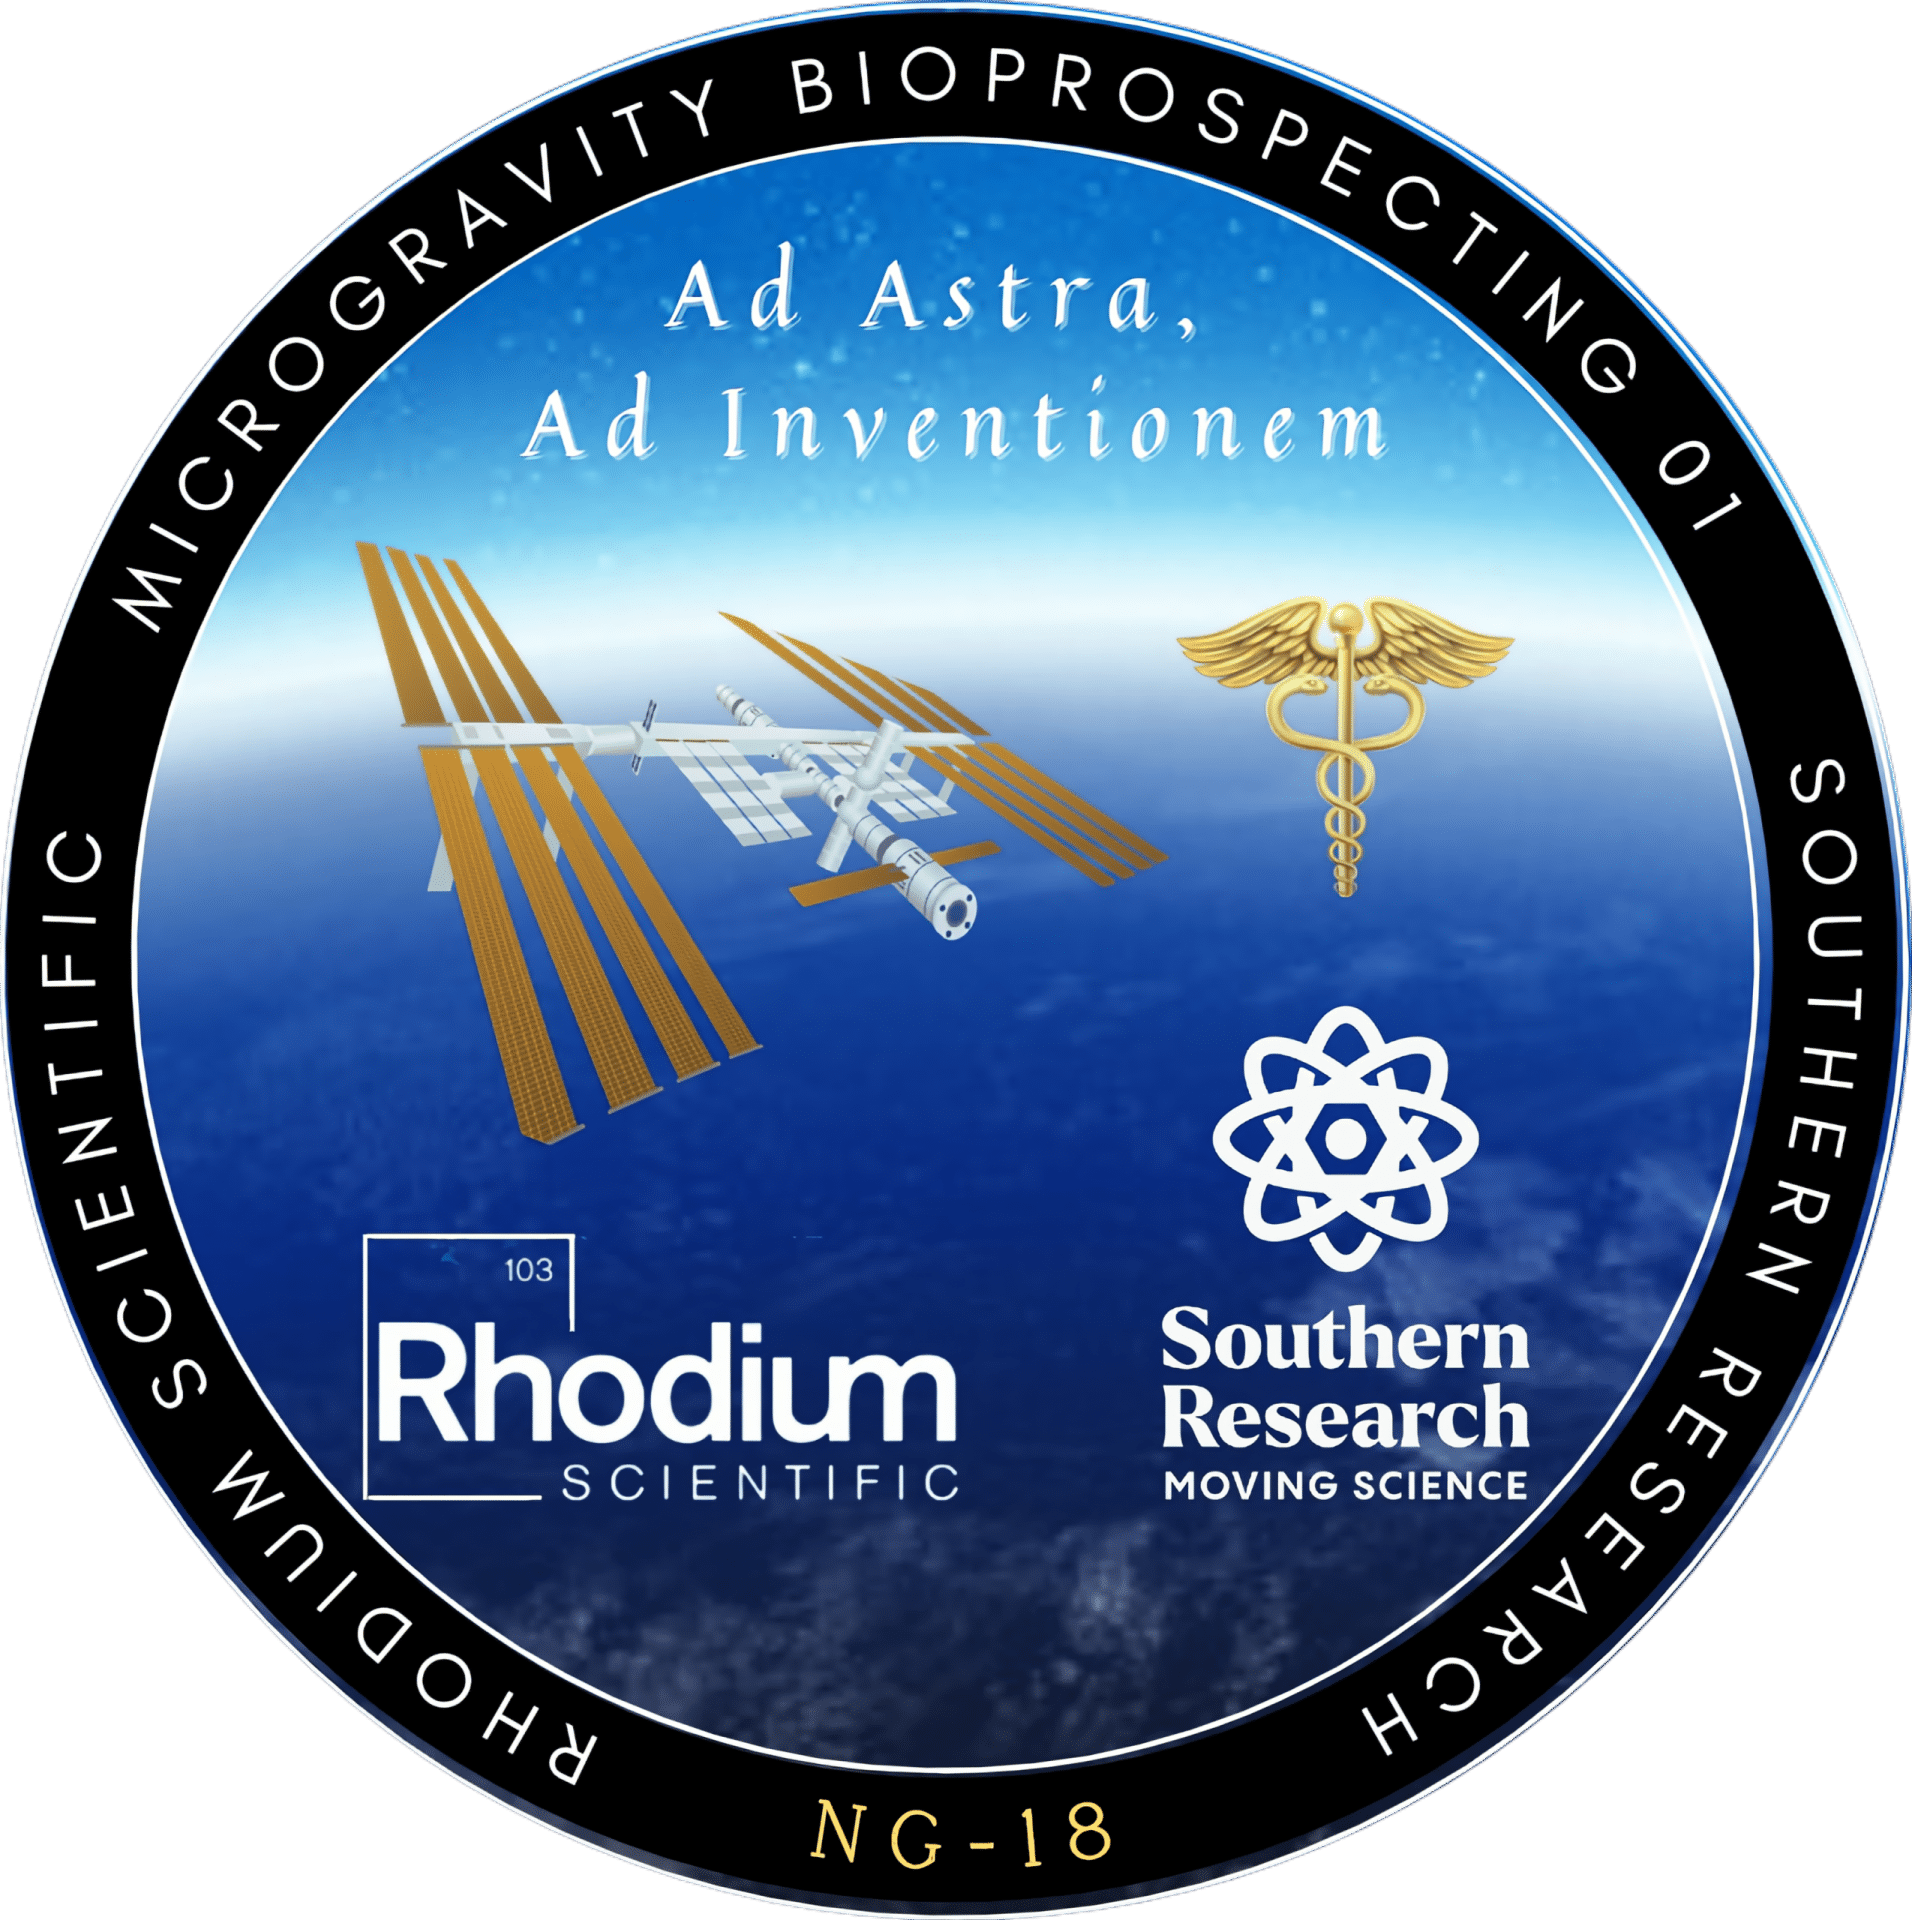 Southern Research and Rhodium Scientific send bacteria to space to explore potential cancer treatments